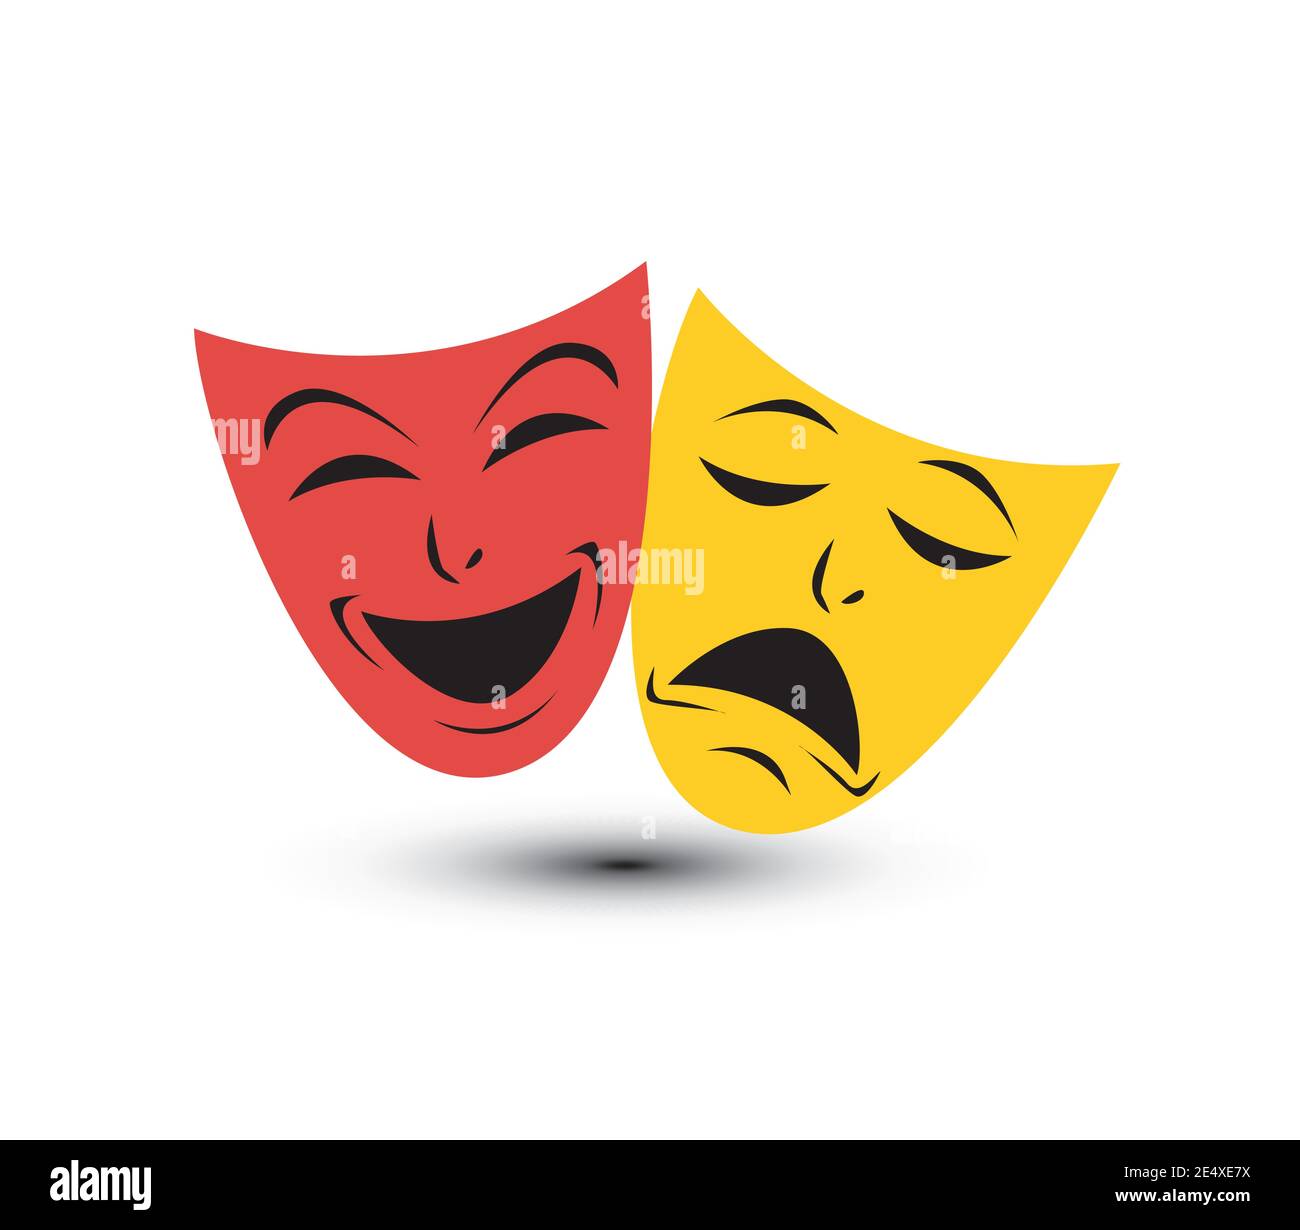 Theater icon with happy and sad masks. VECTOR illustration. Stock Vector